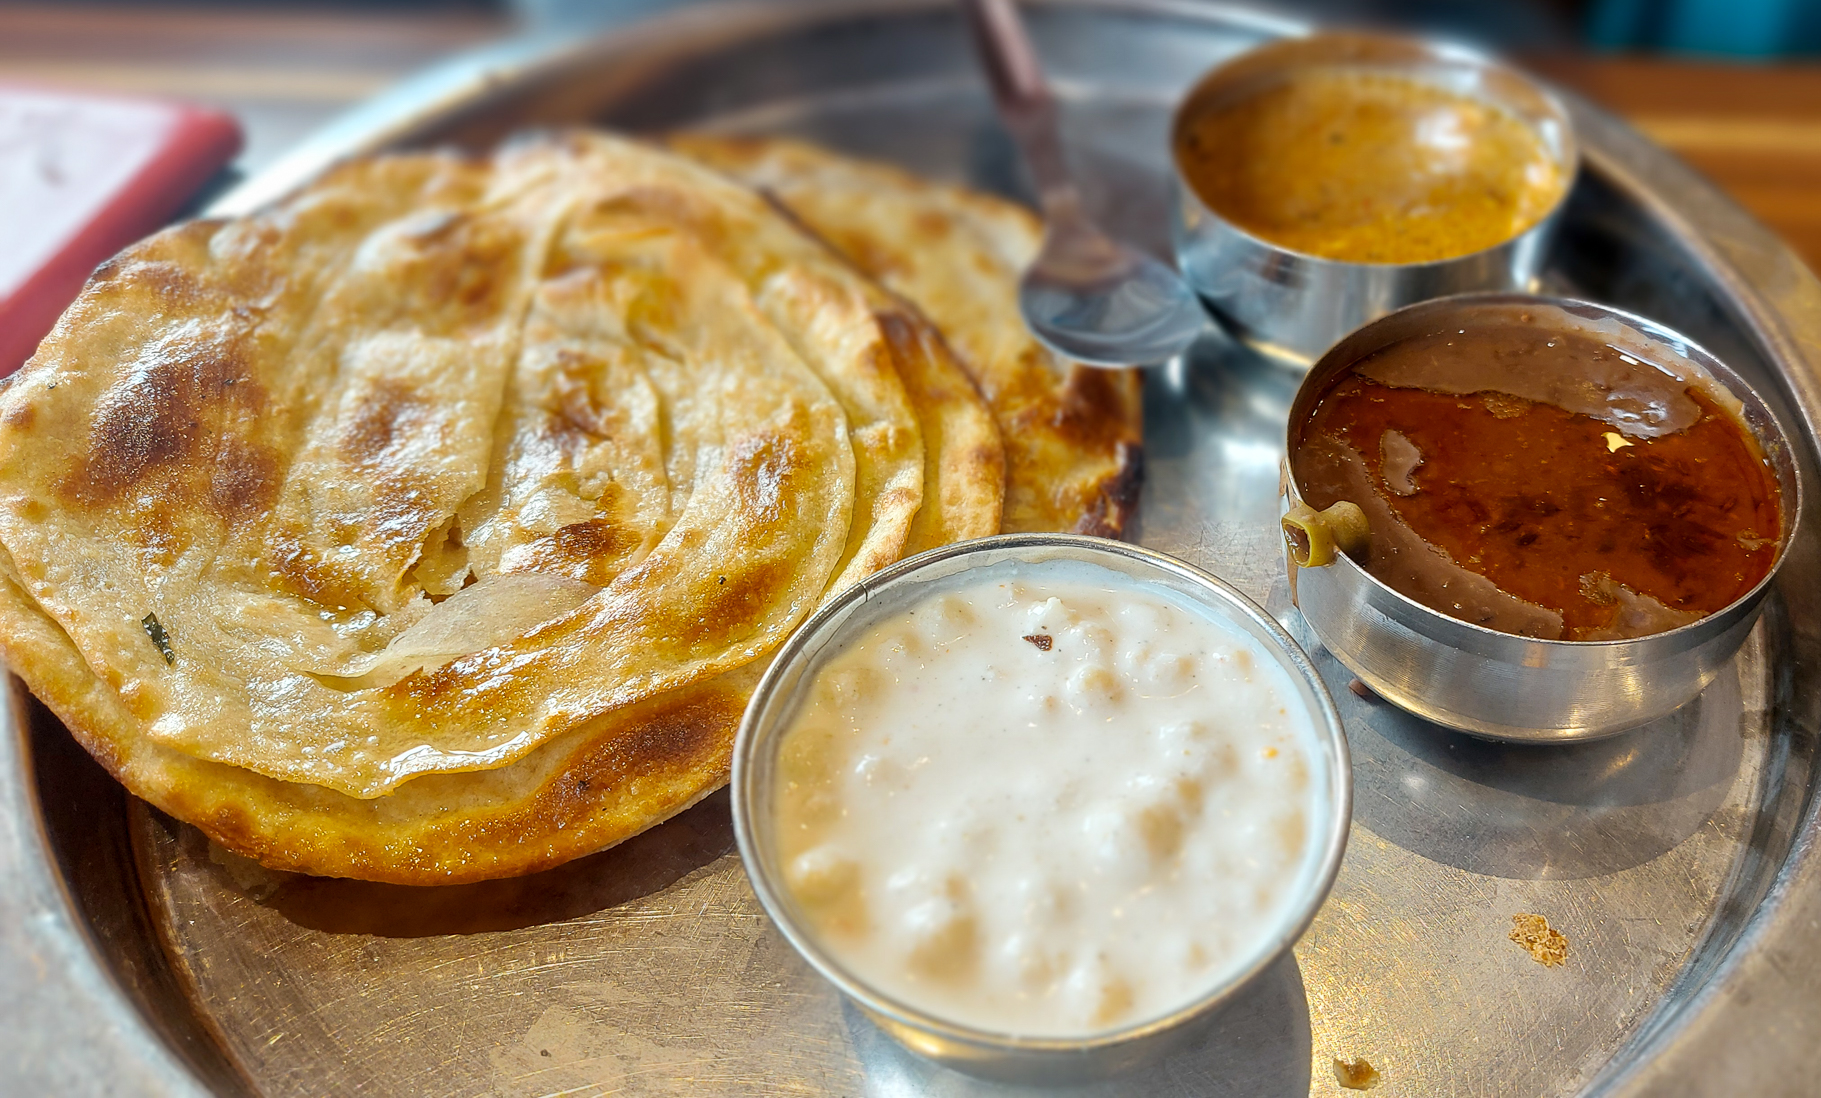 <span  class="uc_style_uc_tiles_grid_image_elementor_uc_items_attribute_title" style="color:#ffffff;">One of the reasons why we wanted to visit India: the delicious food (here: korma with paratha)</span>